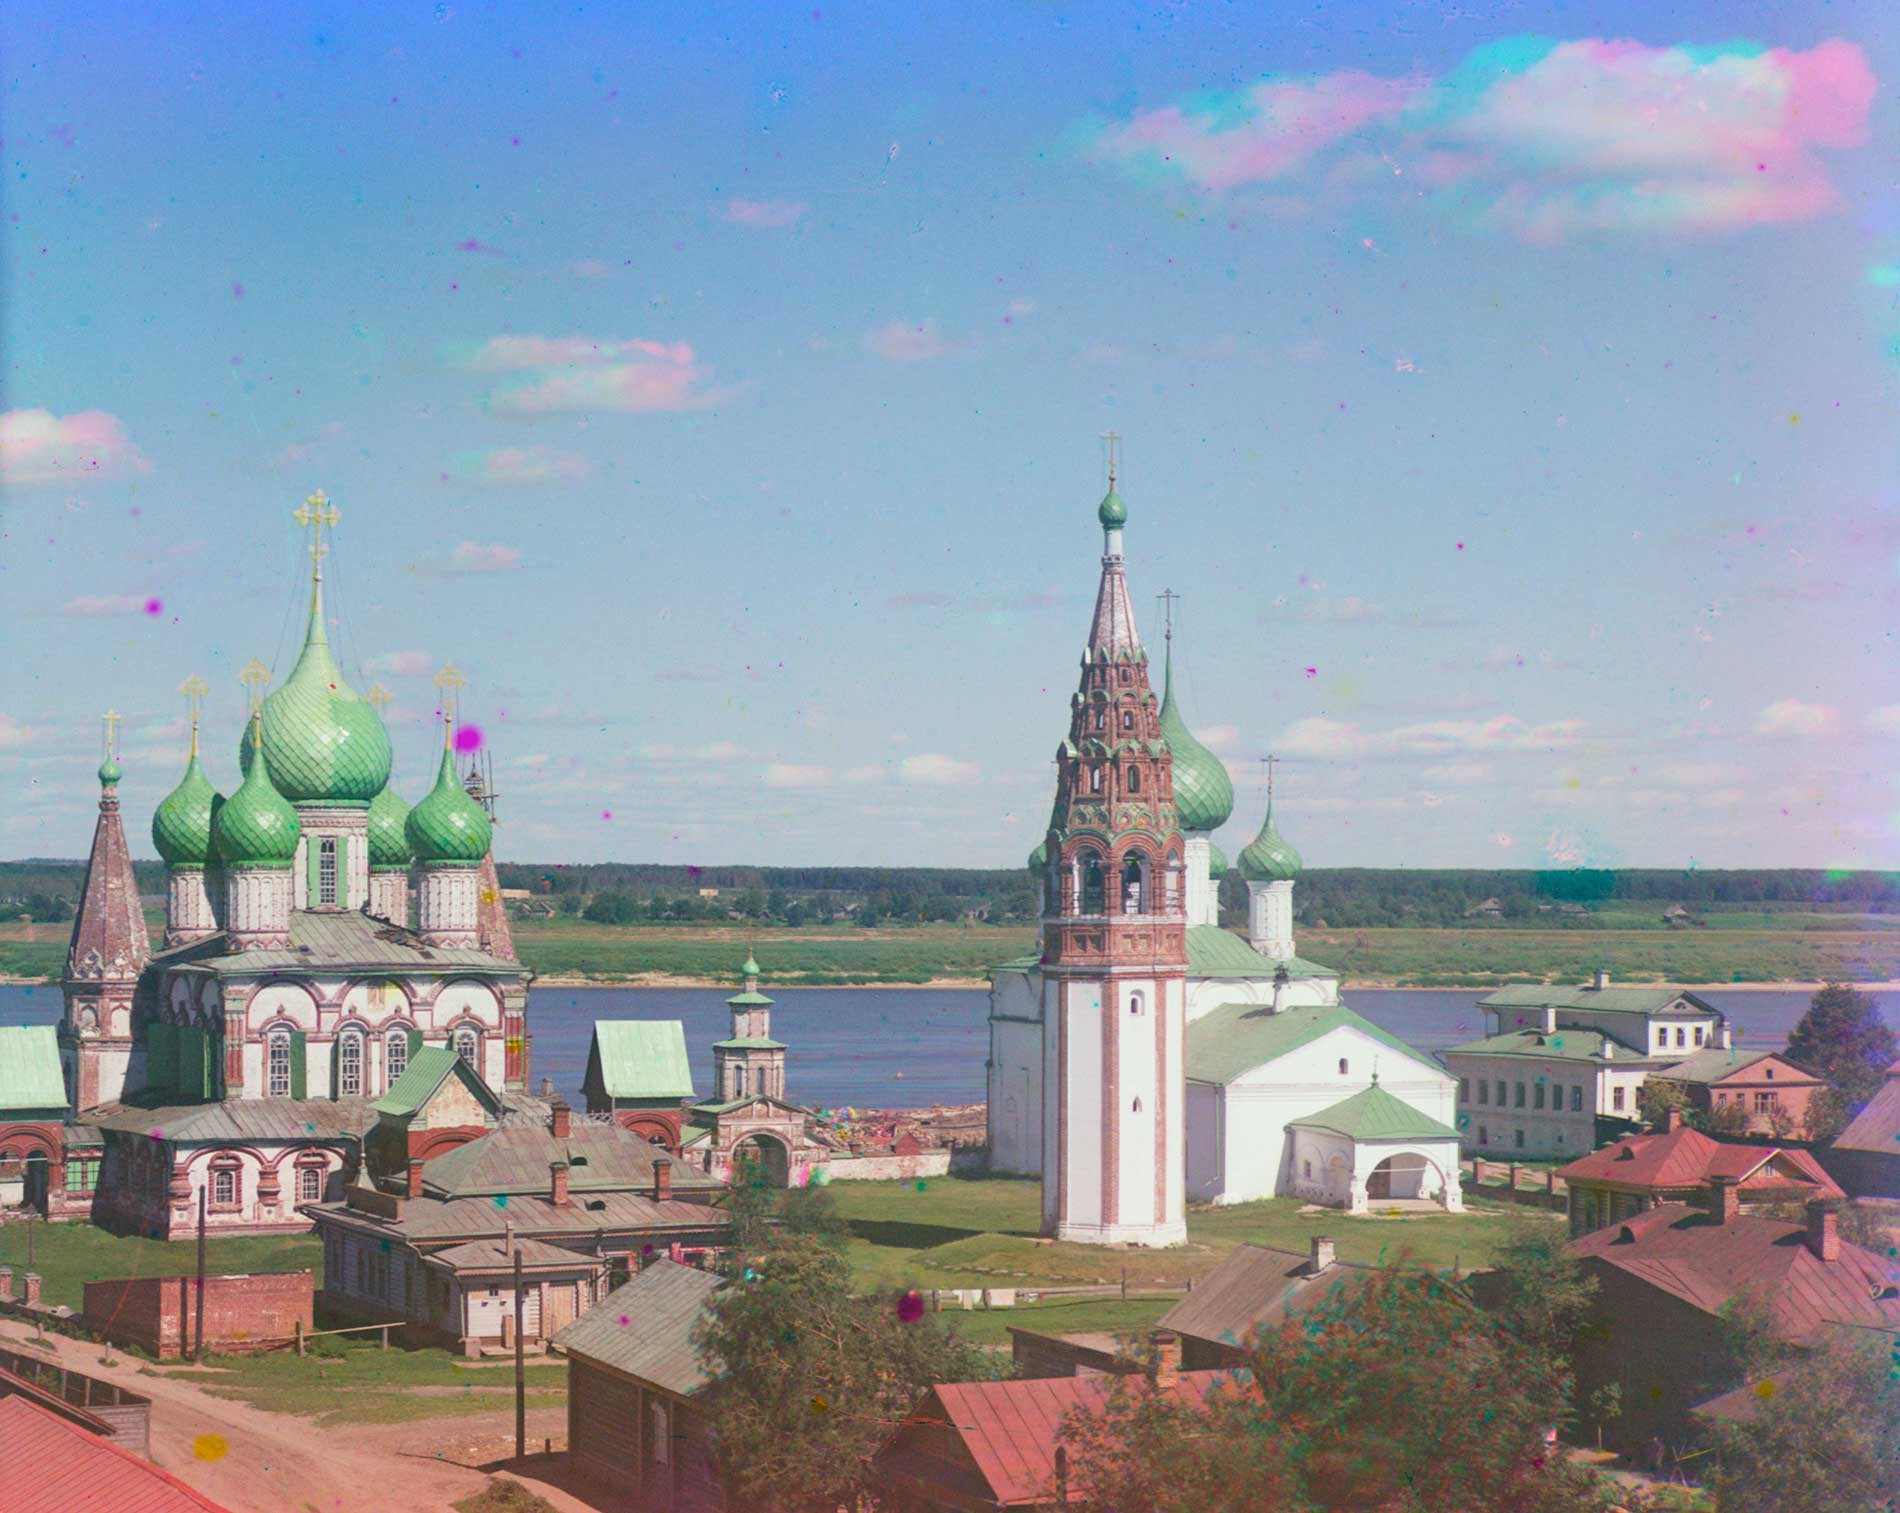 Korovniki ensemble: Church of St. John Chrysostome (left), Holy Gate, bell tower, Church of the Vladimir Icon. Northwest view. Background: Volga River. Mottled appearance of clouds caused by motion during three exposure color process. Summer 1911.